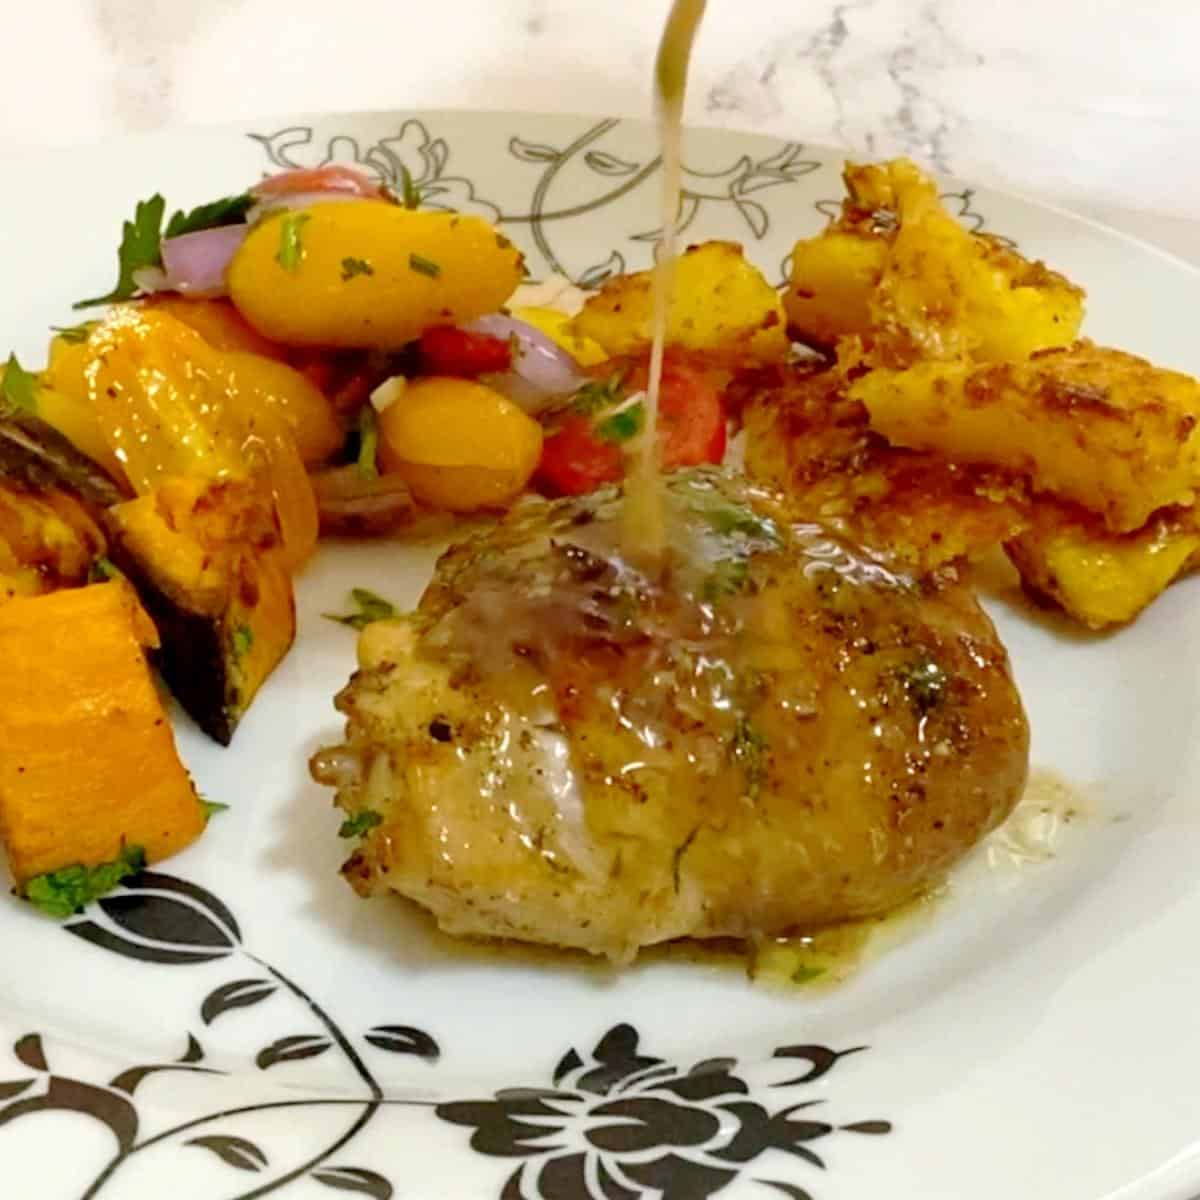 A plate with chicken thigh with pan juices.